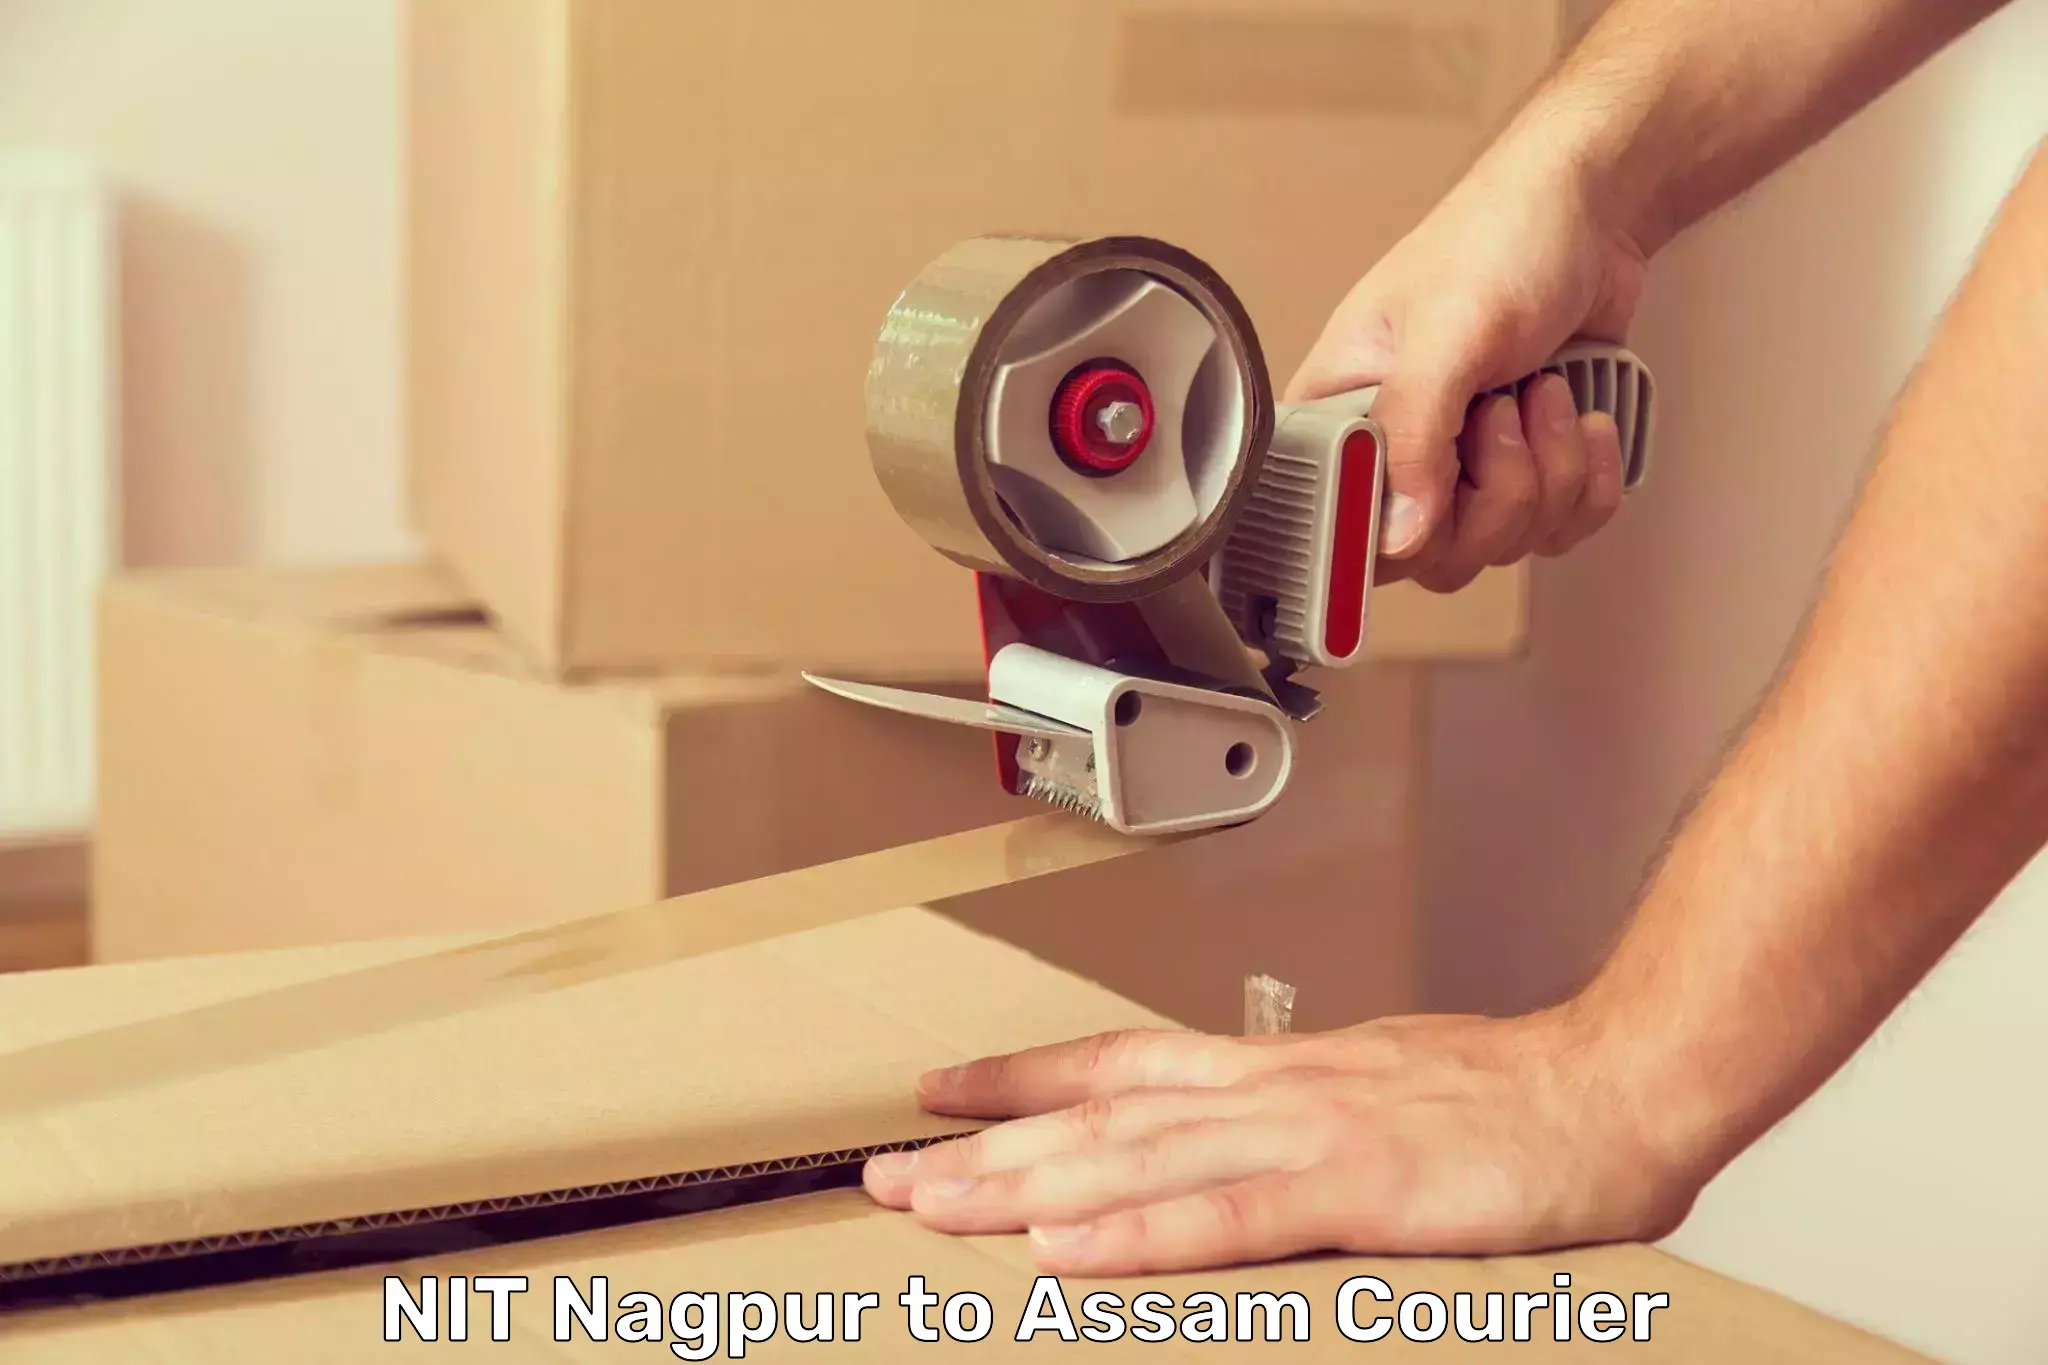 Cash on delivery service NIT Nagpur to Demow